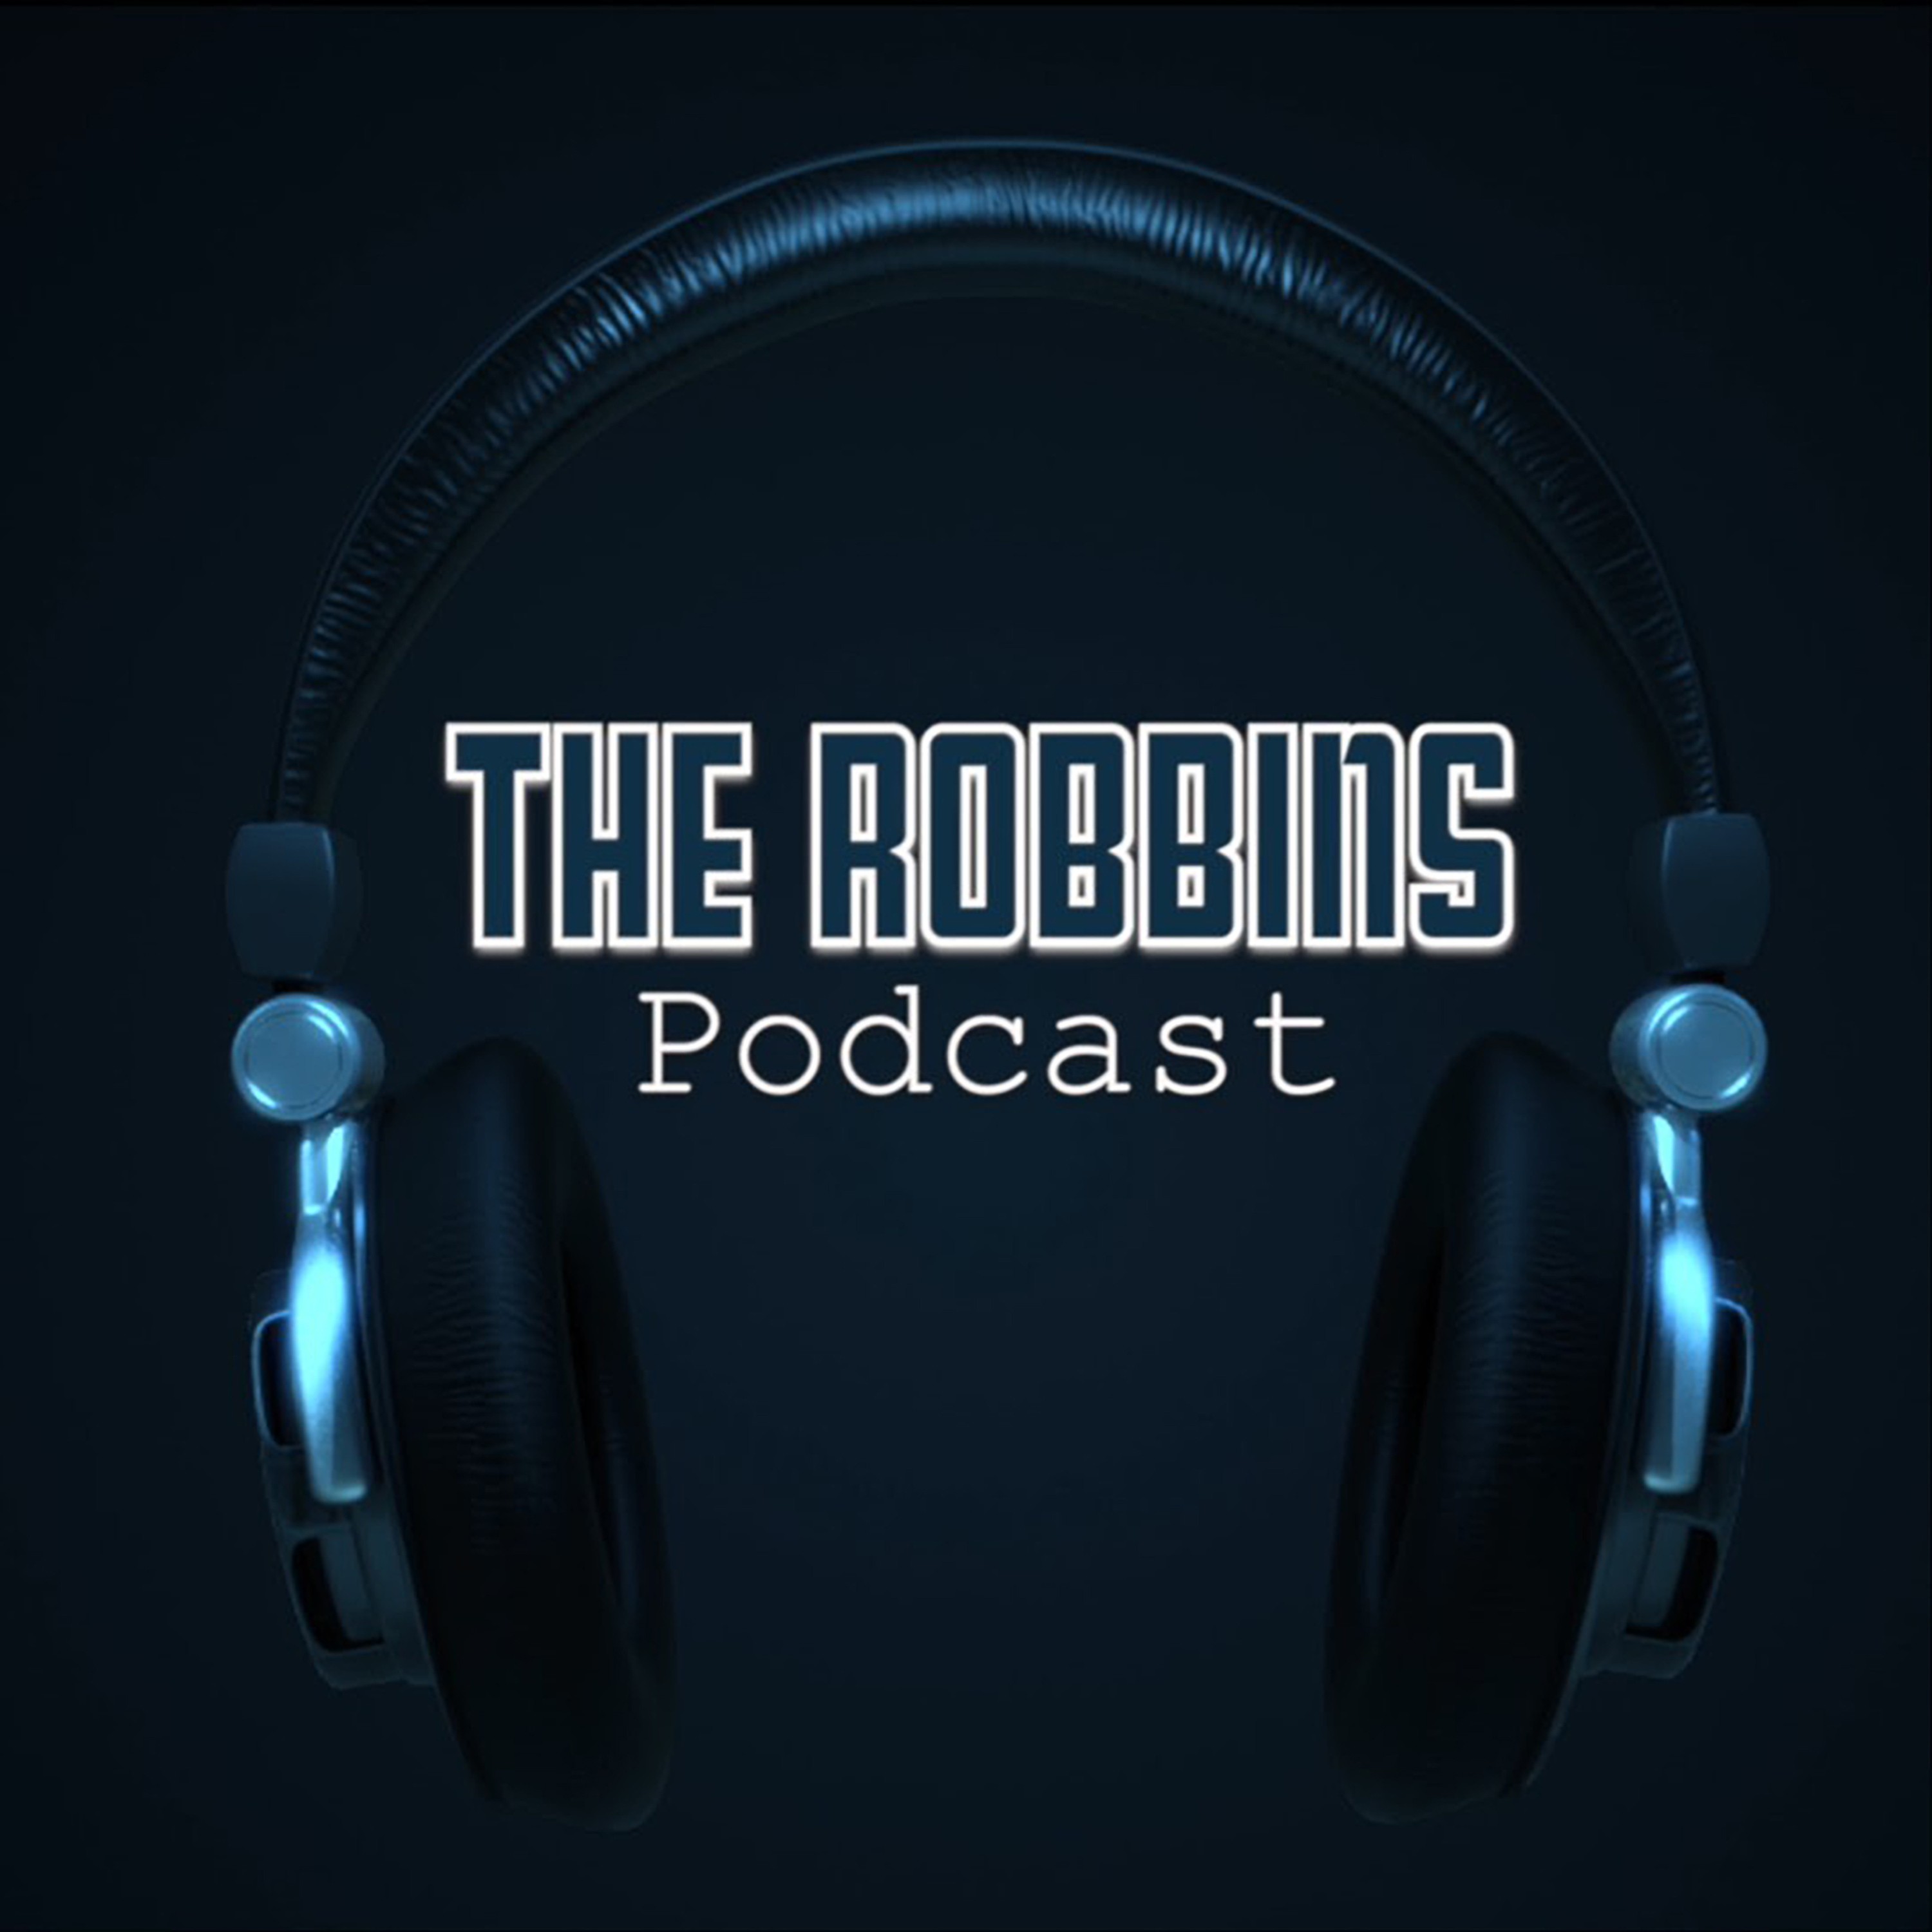 The Robbins Podcast